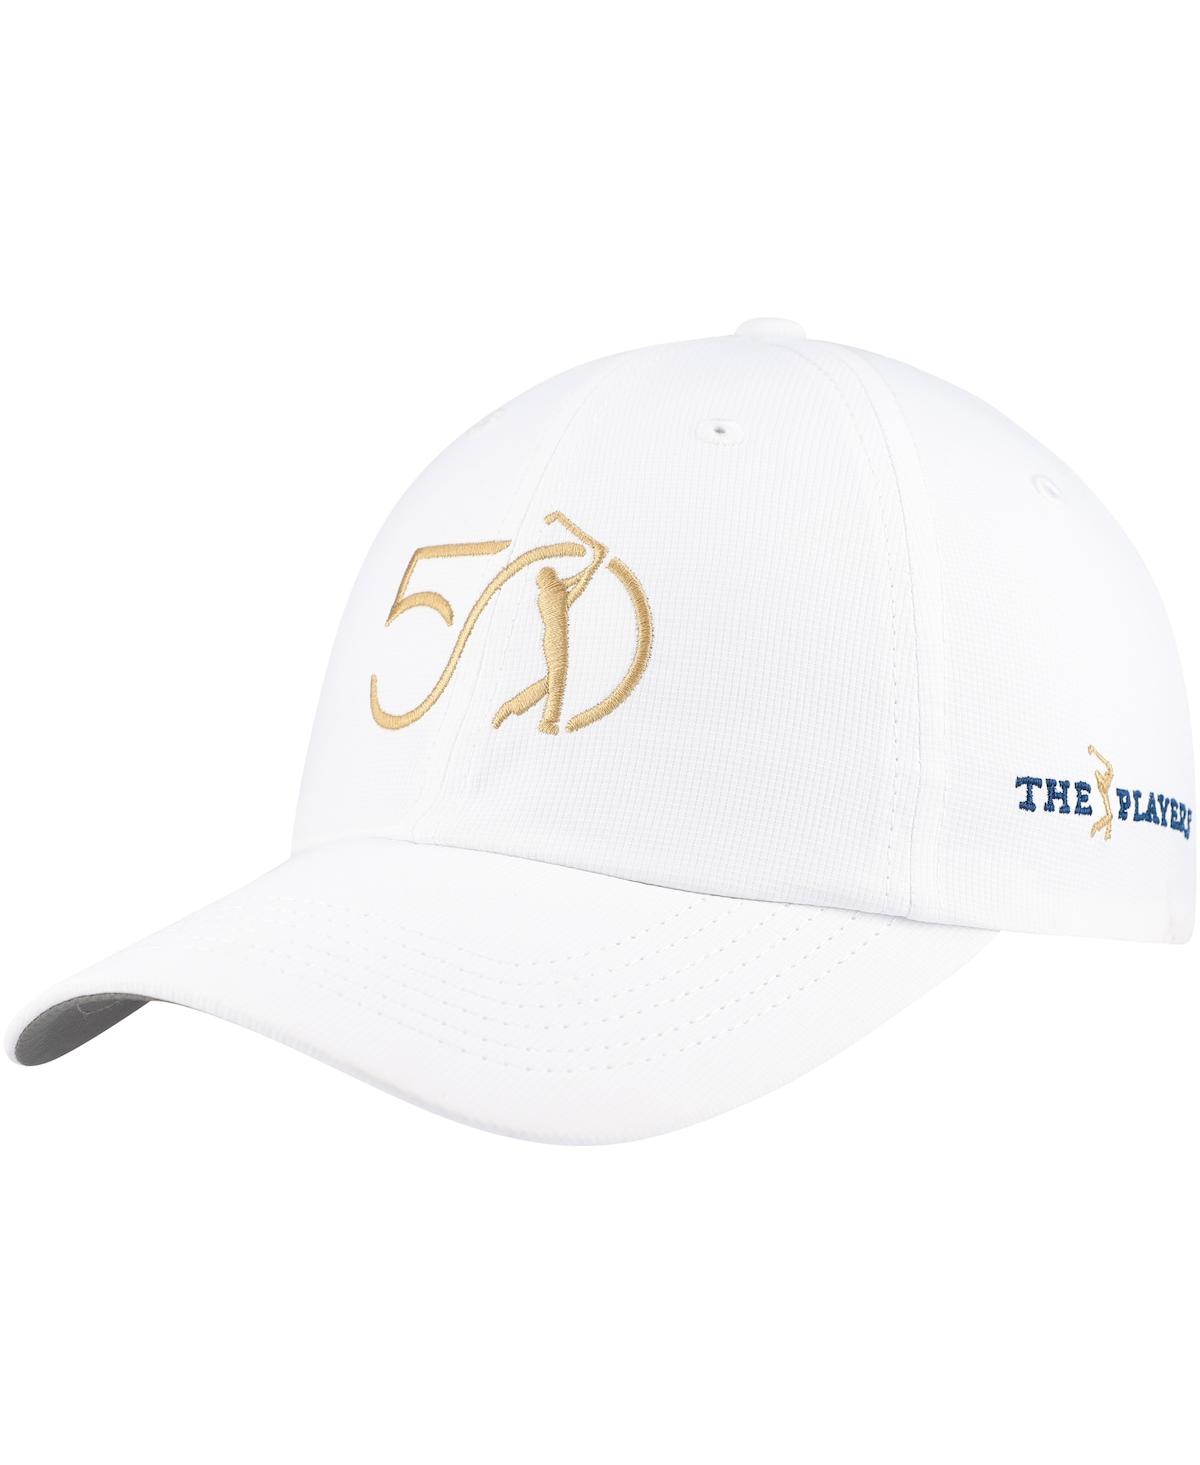 Men's The Players 50th Anniversary Original Performance Adjustable Hat - White